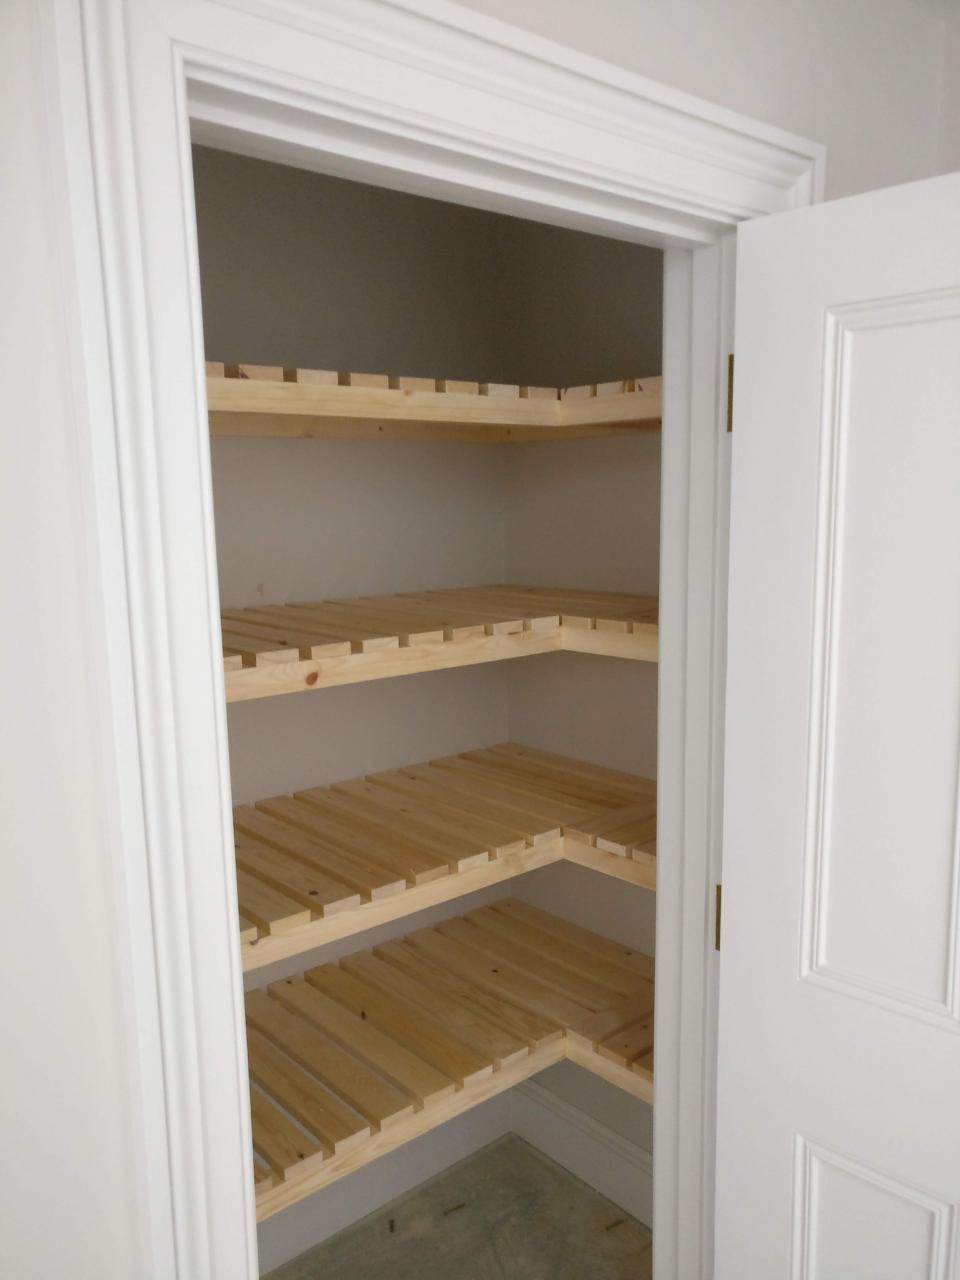 Built in airing cupboard slatted shelves that I made Laundry Cupboard